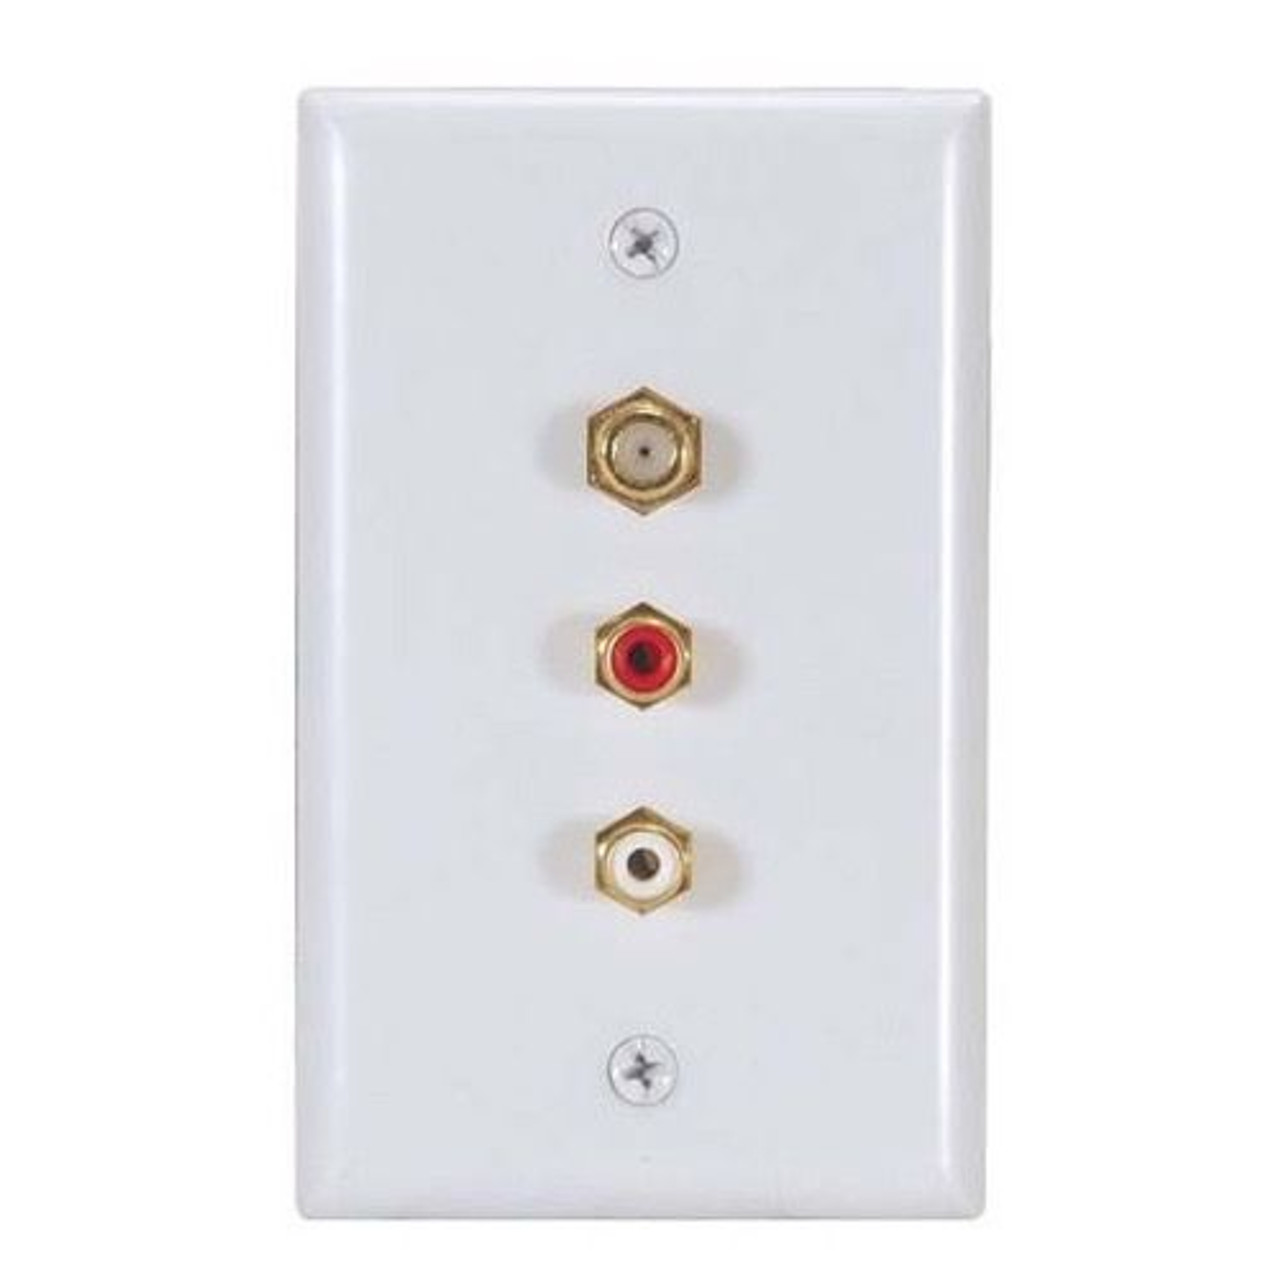 Eagle RCA Female Wall Plate With F Connector 2 RCA Jack White Gold Dual RCA Jack Plugs White Gold Plate Audio Speaker Wall Plate RCA / Coax Combo Flush Mount Outlet Cover